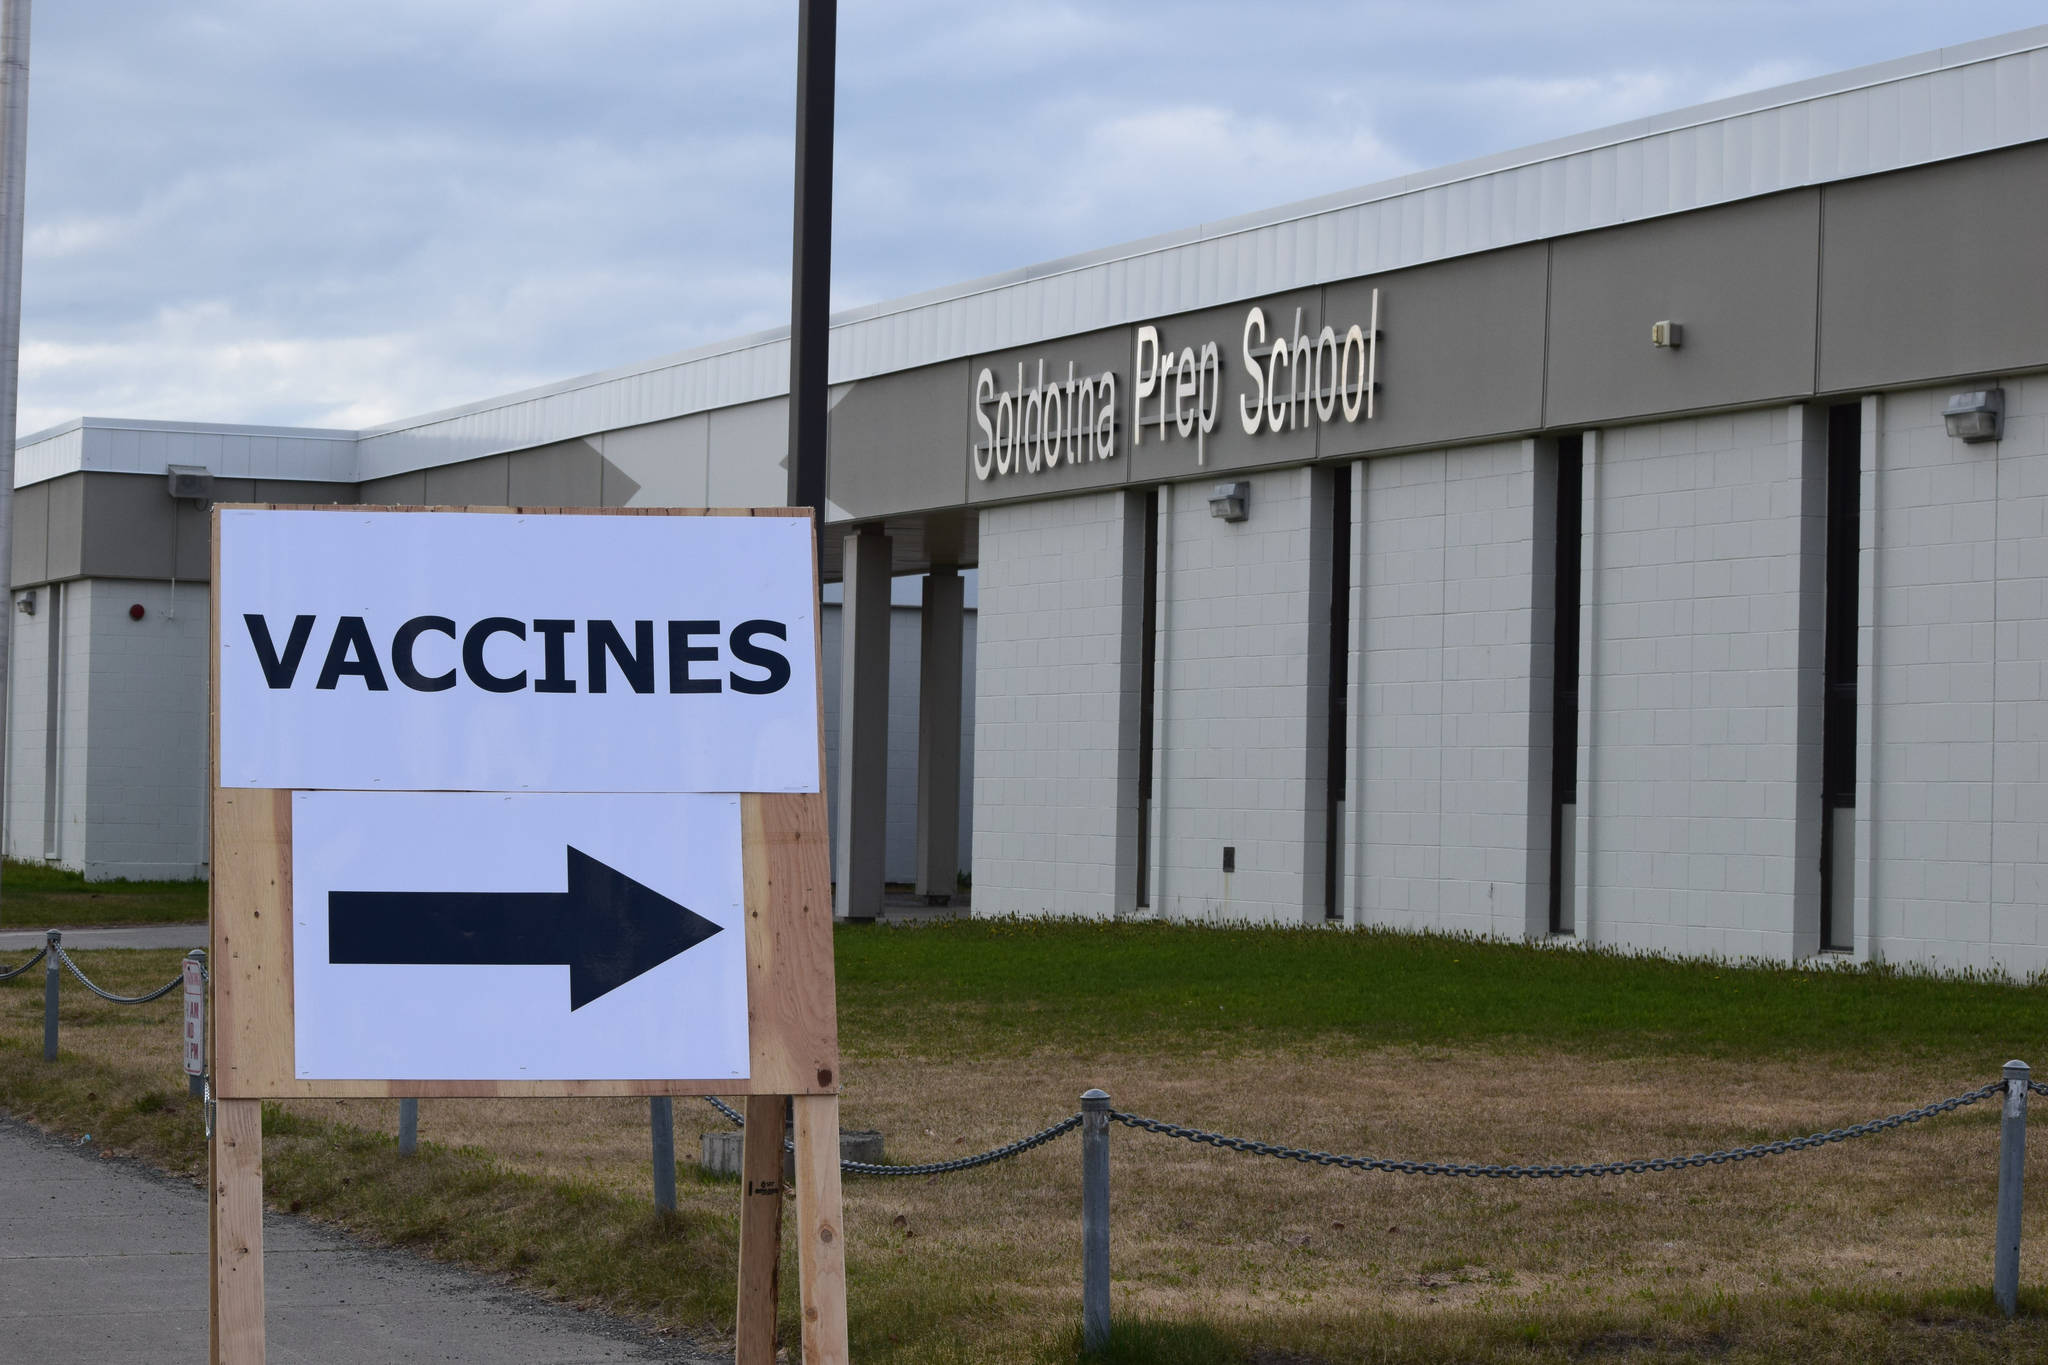 The Soldotna Professional Pharmacy and Kenai Peninsula Borough Office of Emergency Management offered the Pfizer-BioNTech, Moderna and Johnson & Johnson/Janssen vaccines at the walk-in clinic at Soldotna Prep School on Friday, May 14, 2021. (Camille Botello / Peninsula Clarion)